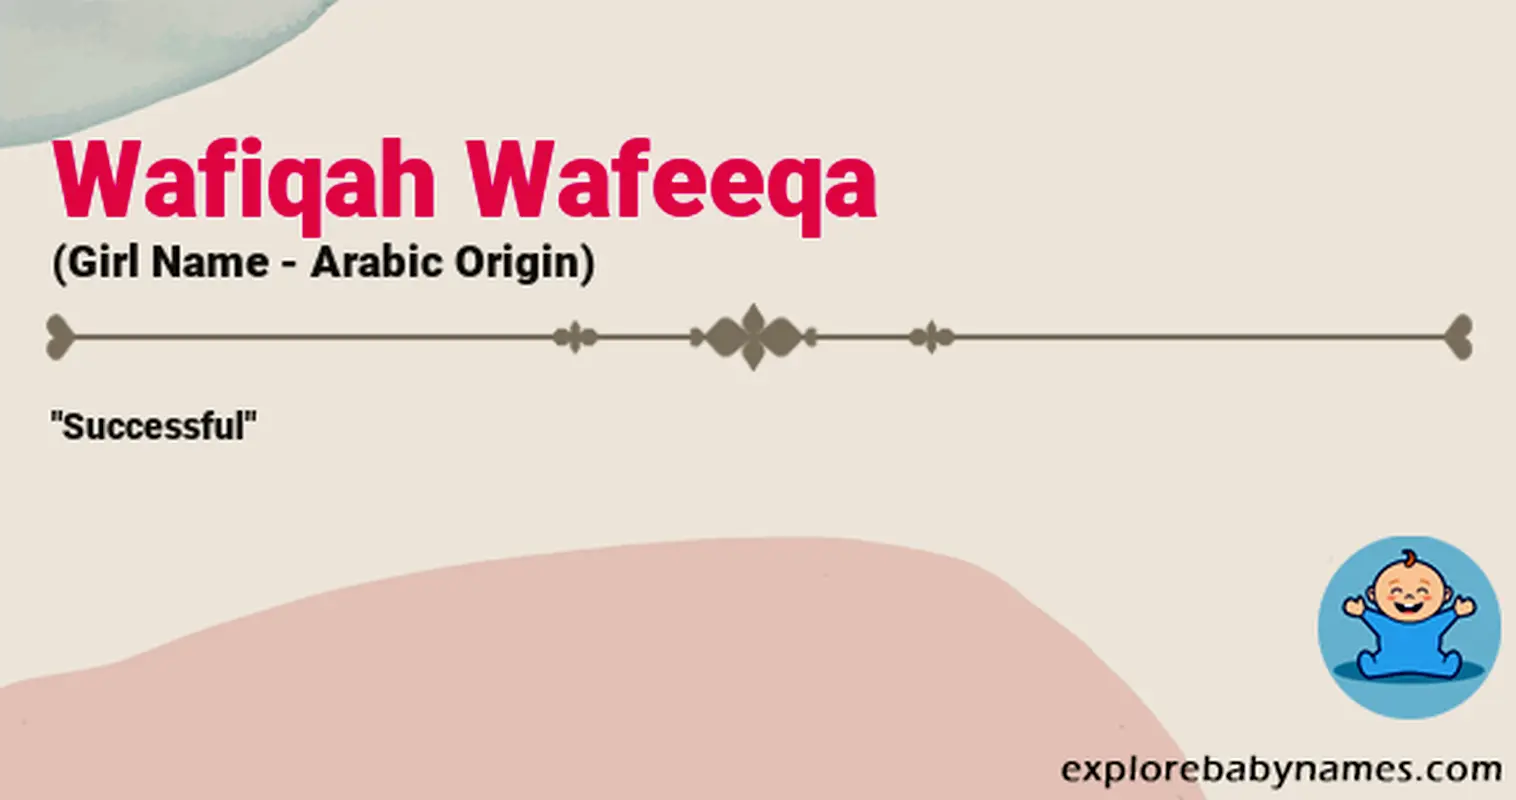 Meaning of Wafiqah Wafeeqa